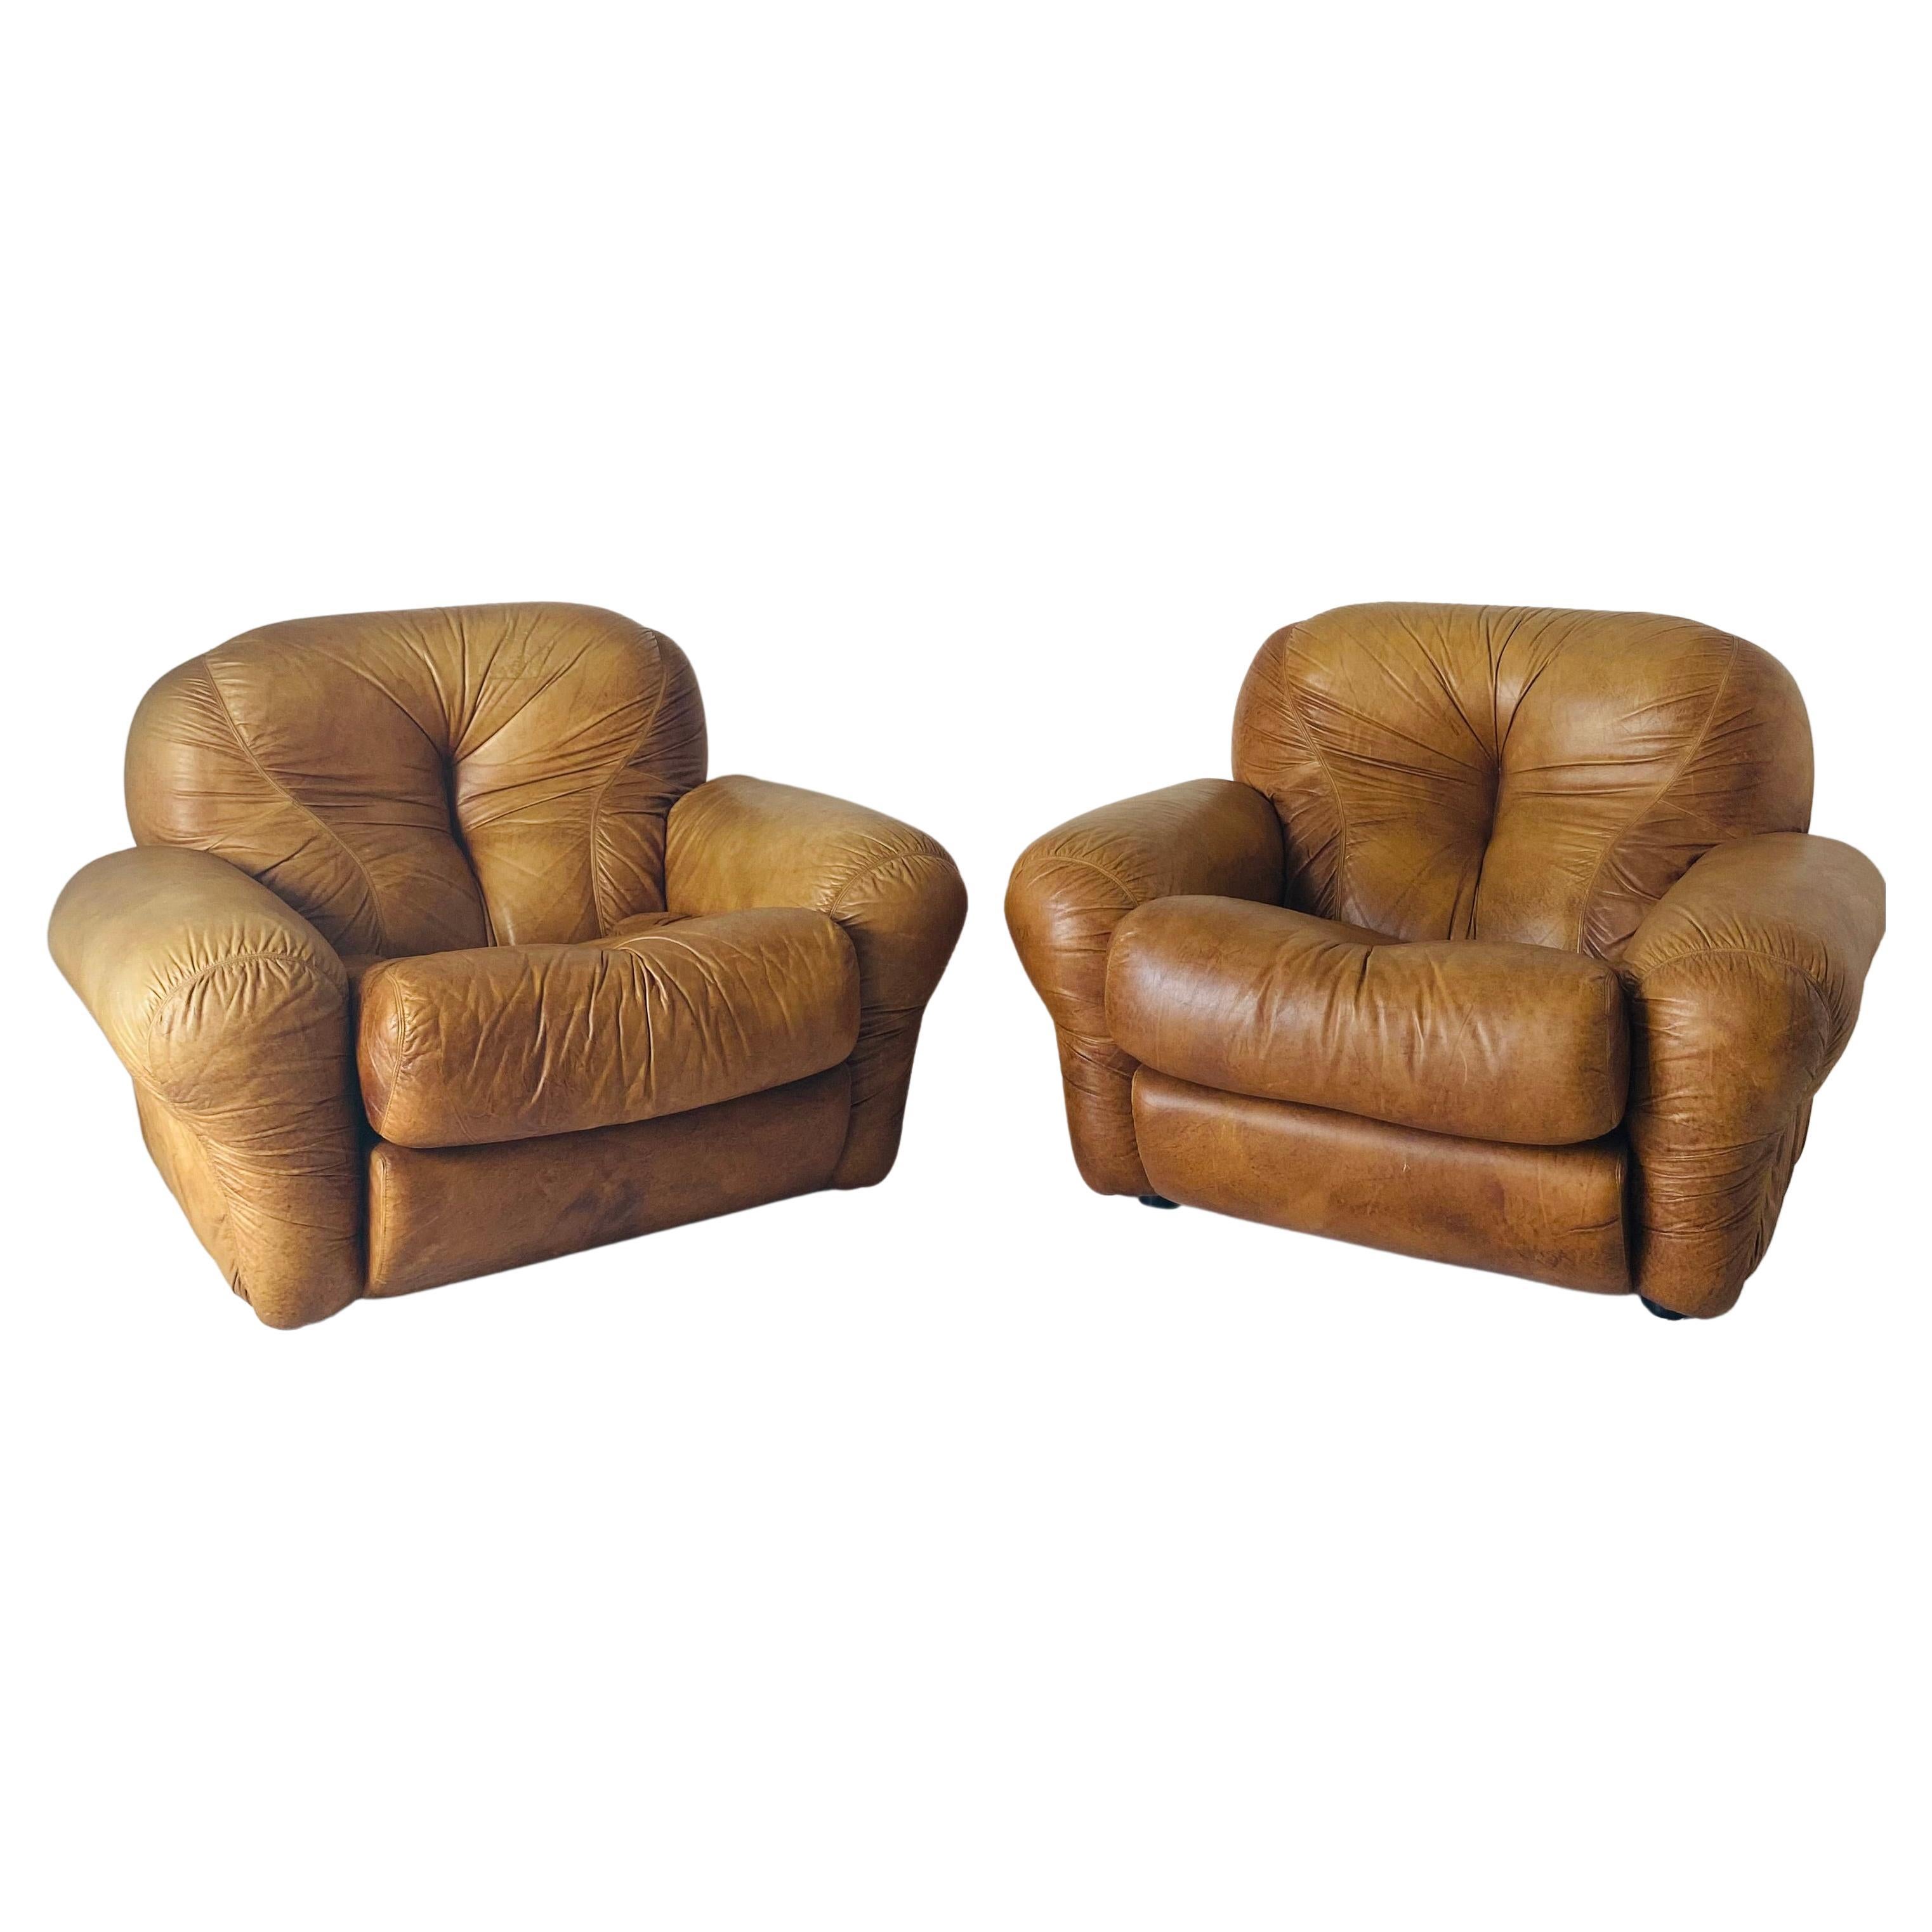 Brown leather lounge chairs, "Sapporo" model , Girgi mobili, Italy 1970s